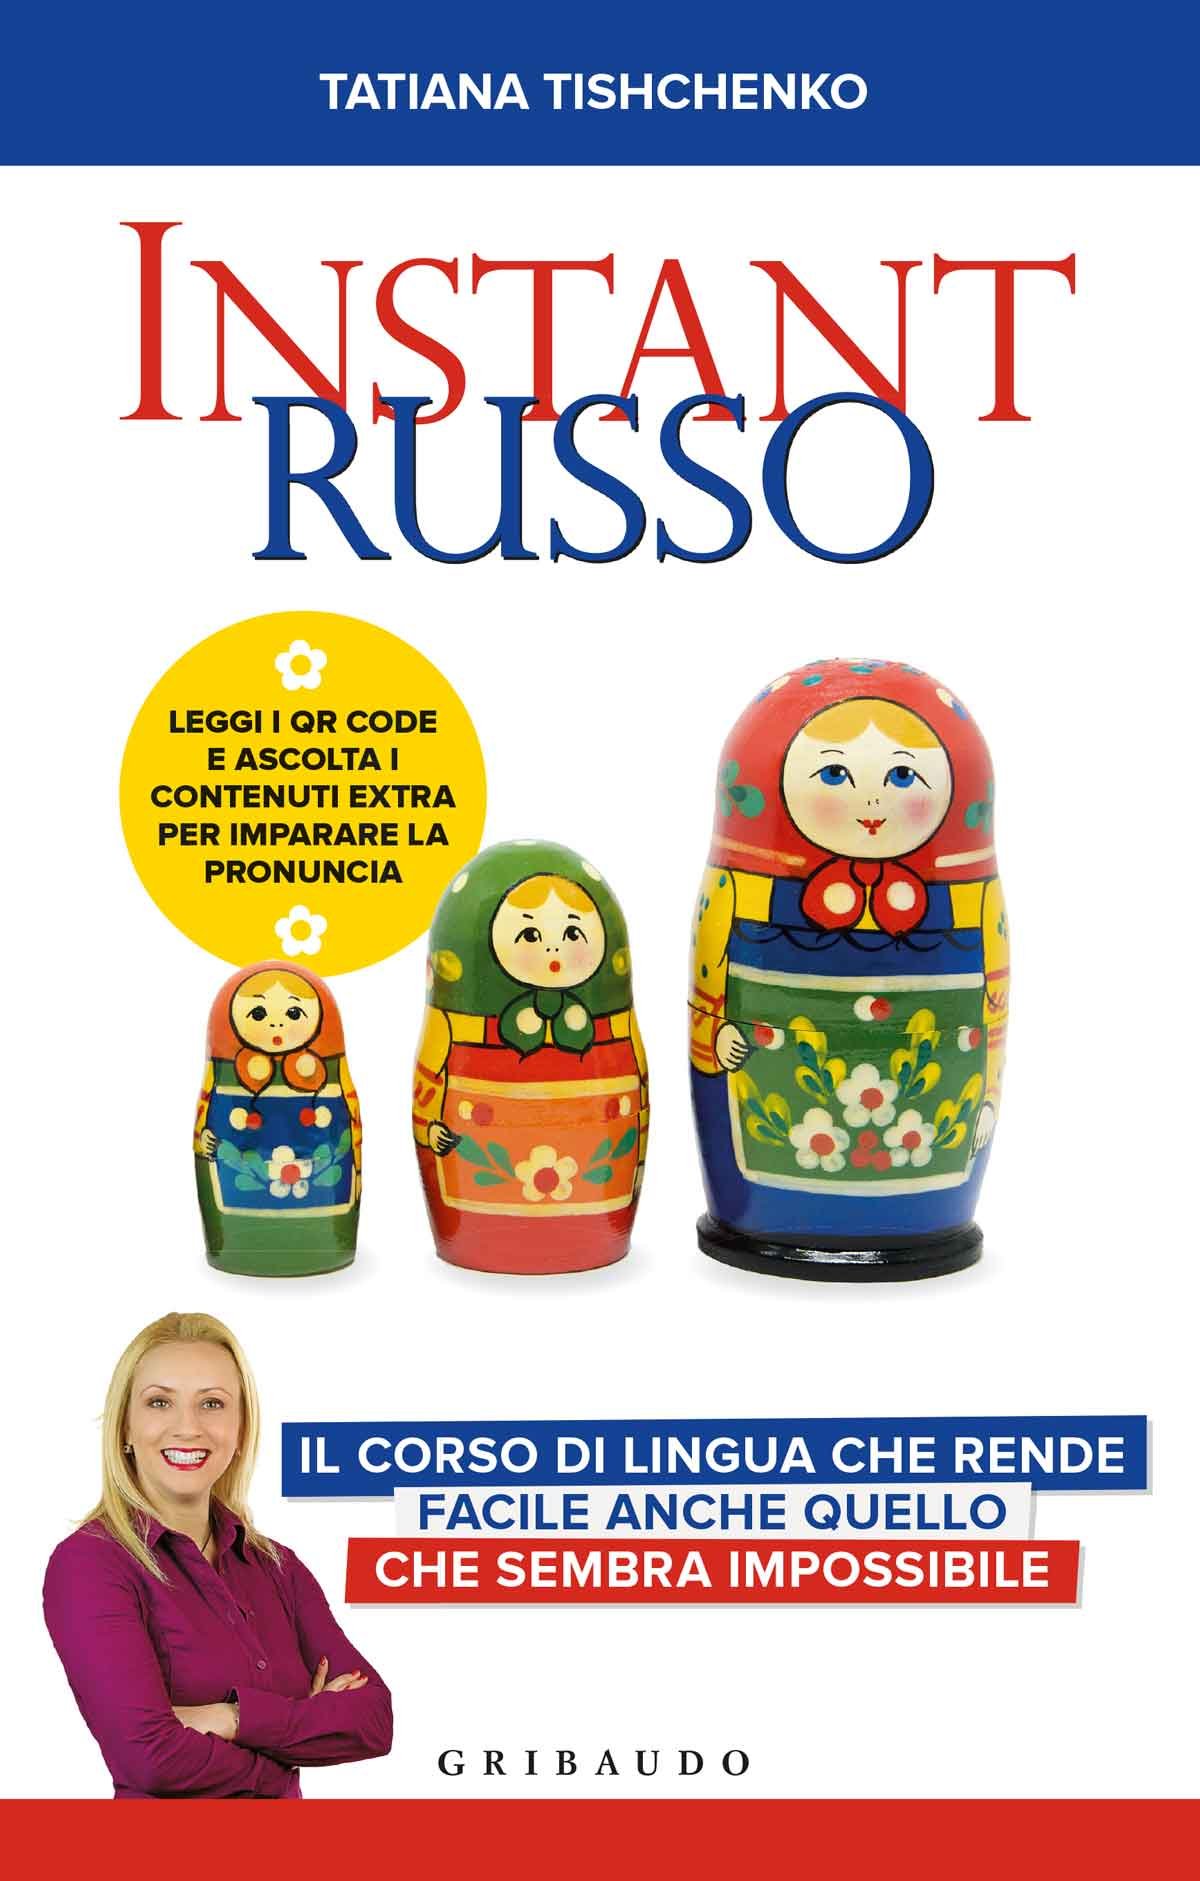 Instant russo